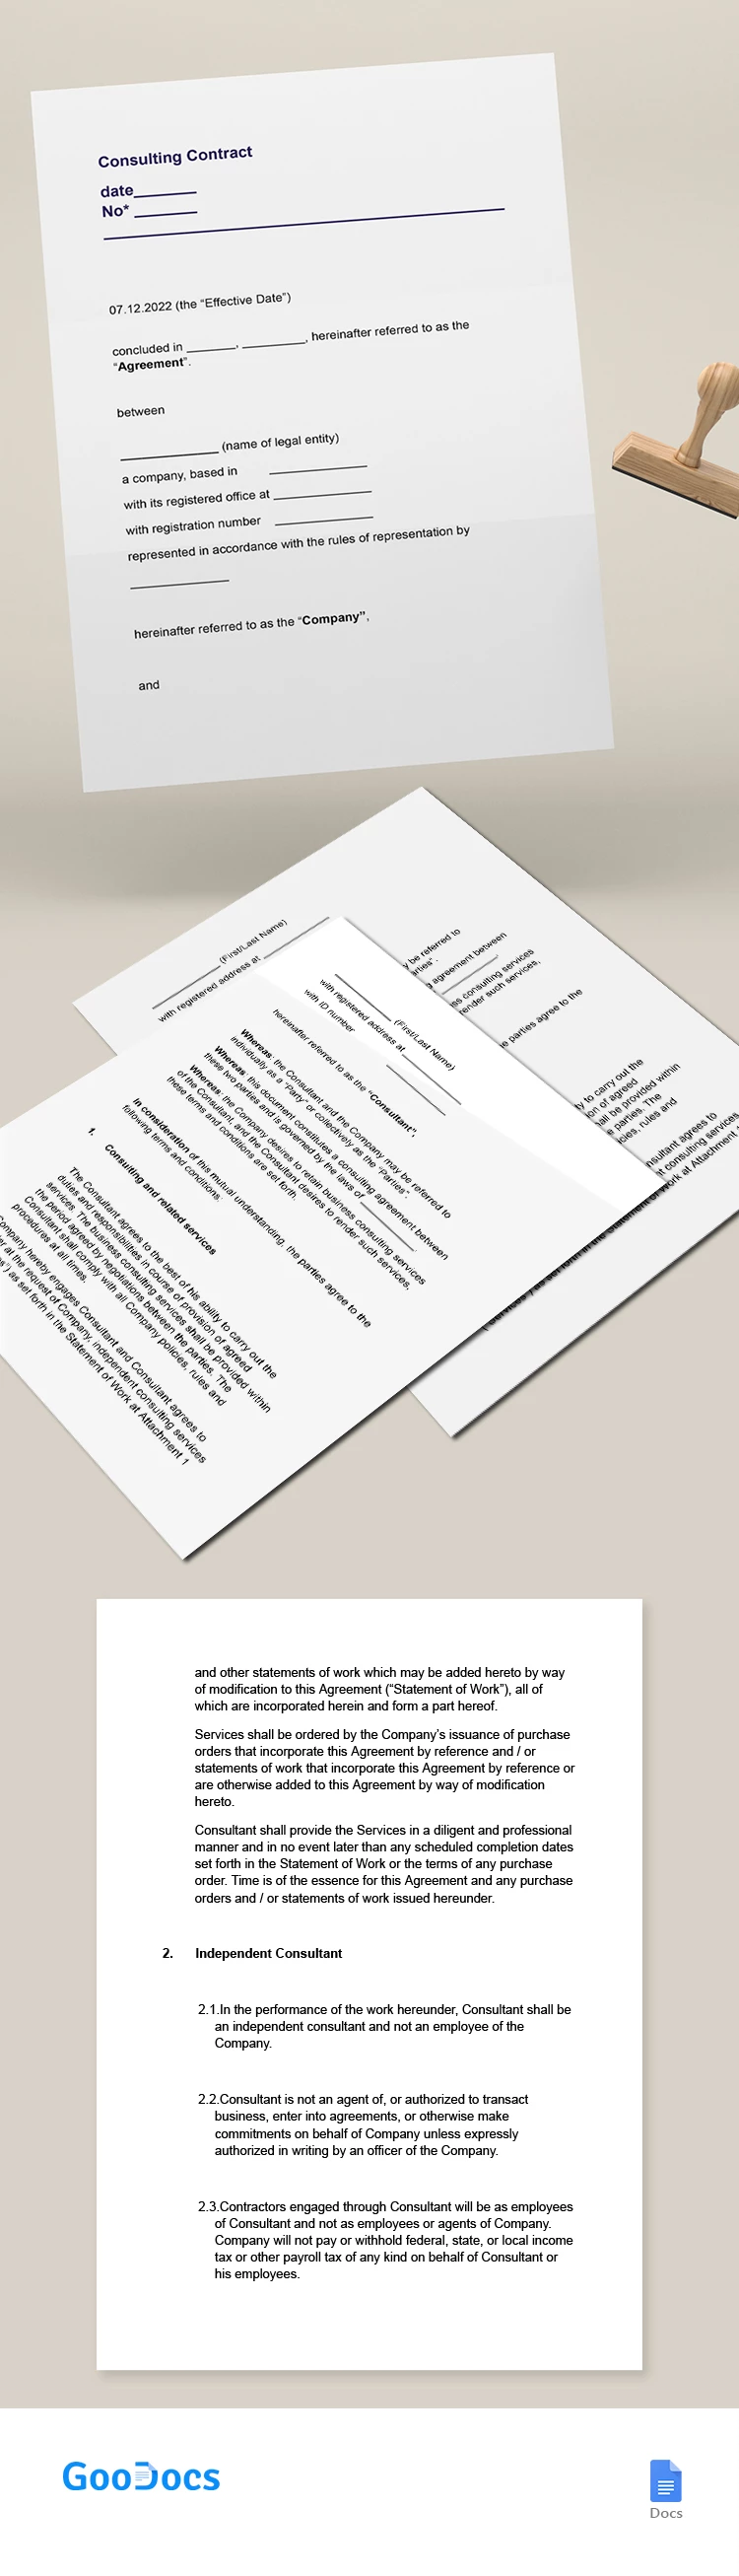 Consulting Contract - free Google Docs Template - 10065550